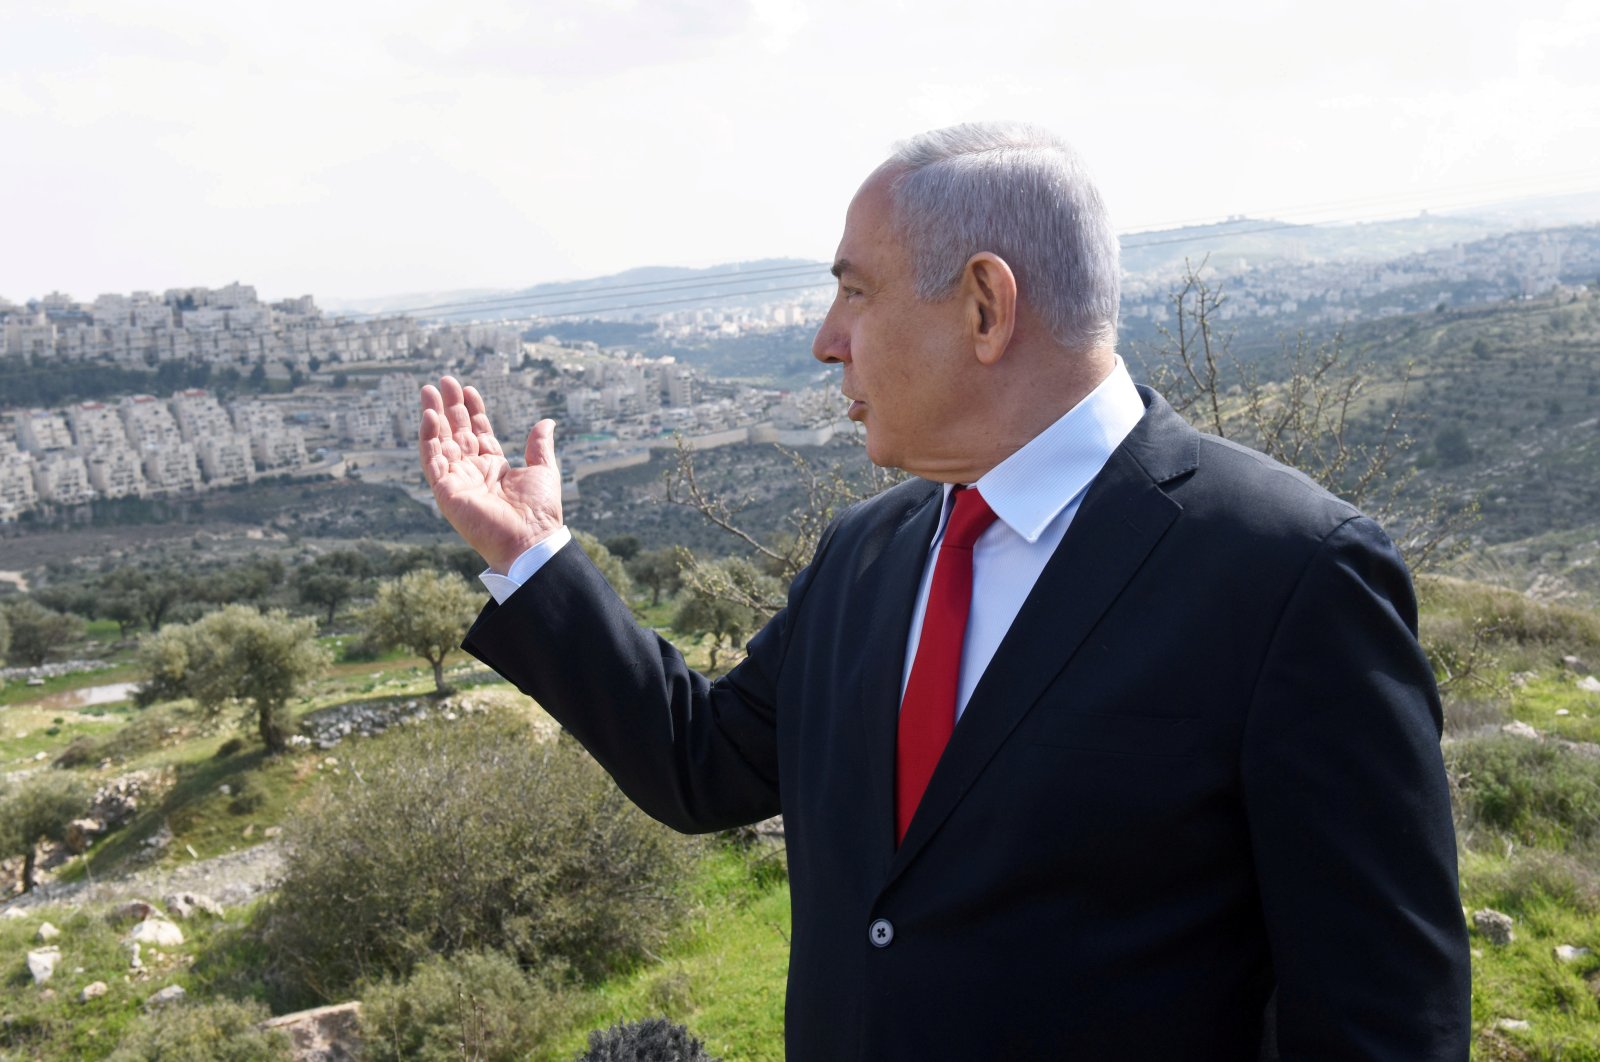 Israeli Prime Minister Benjamin Netanyahu delivers a statement overlooking the Israeli settlement of Har Homa, located in an area of the Israeli-occupied West Bank, Feb. 20, 2020. (REUTERS Photo)